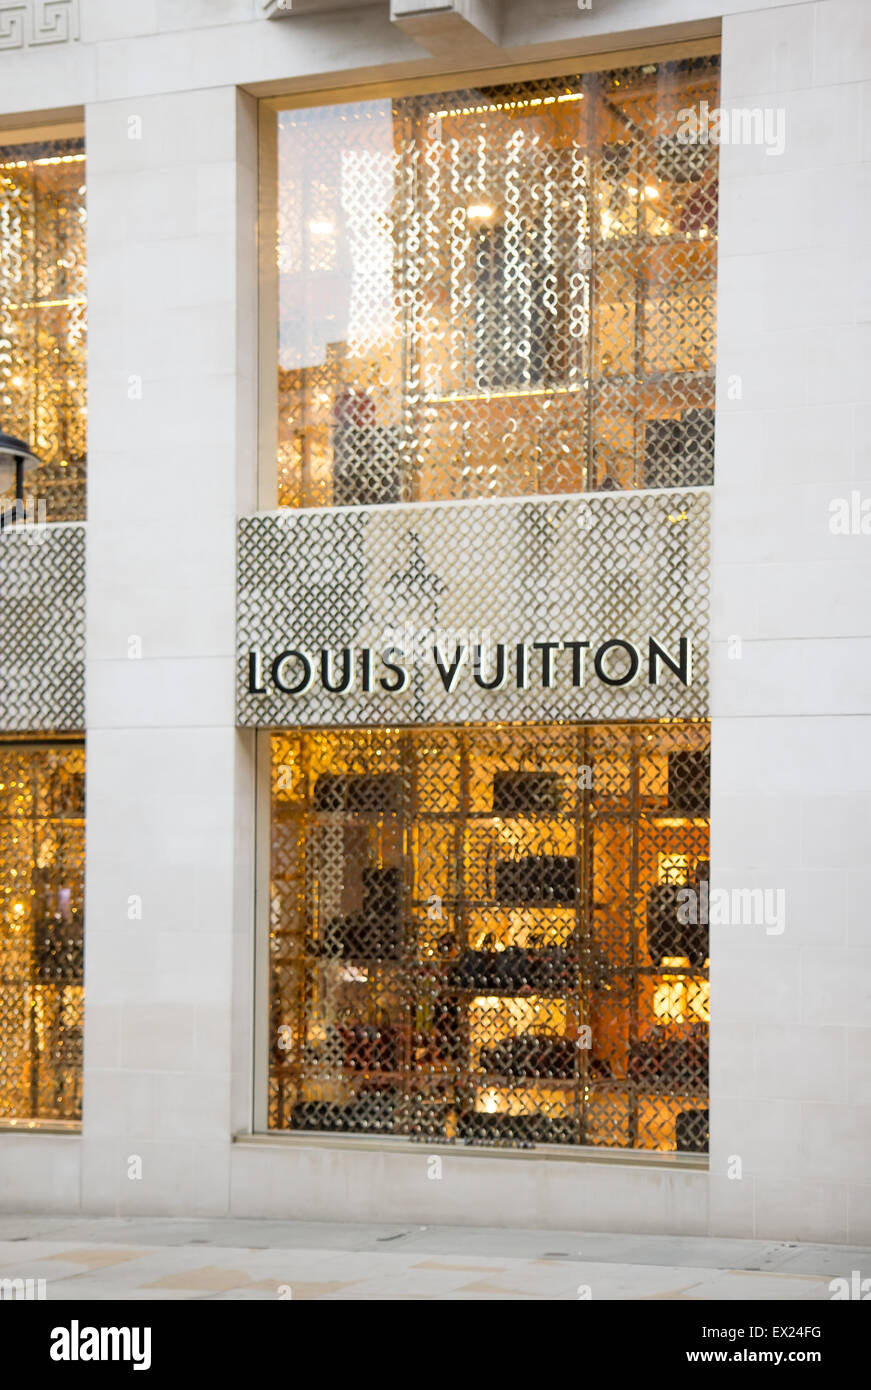 Louis Vuitton store in London Stock Photo